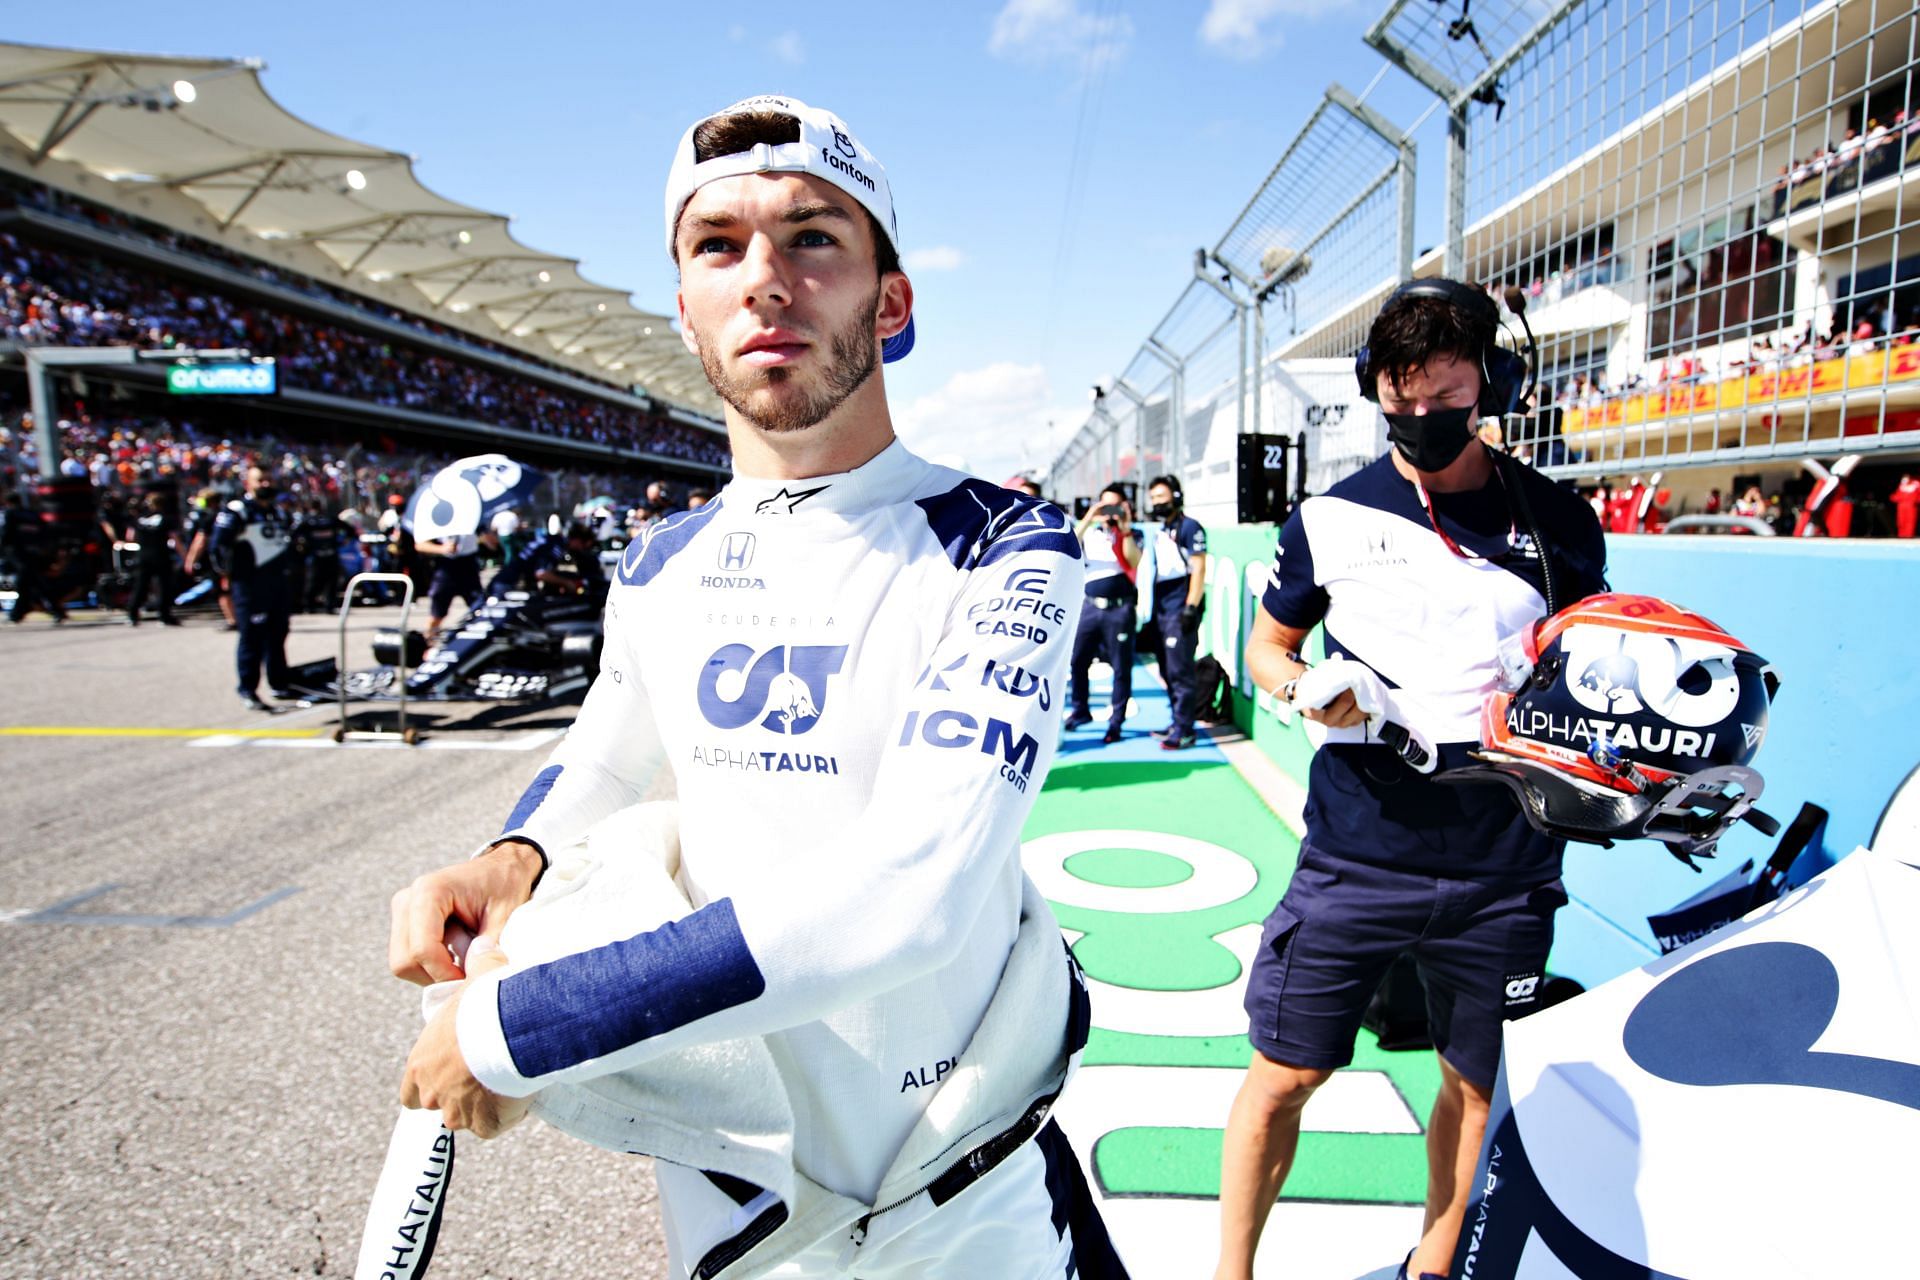 Pierre Gasly hopes to make up for the US GP disappointment. (Photo by Peter Fox/Getty Images)